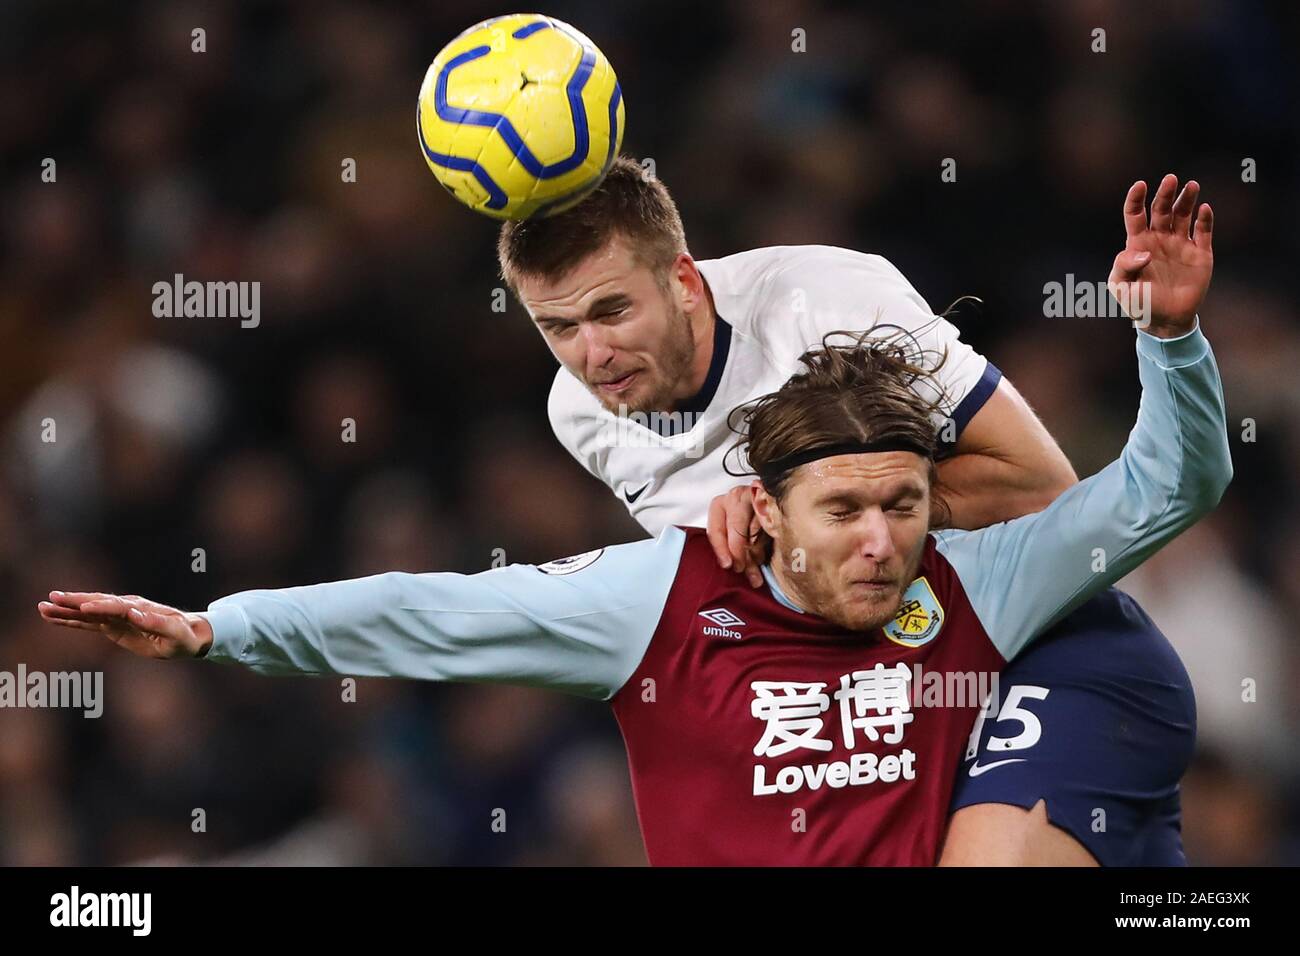 Eric Dier of Tottenham Hotspur and Jeff Hendrick of Burnley in action - Tottenham Hotspur v Burnley, Premier League, Tottenham Hotspur Stadium, London, UK - 7th December 2019  Editorial Use Only - DataCo restrictions apply Stock Photo